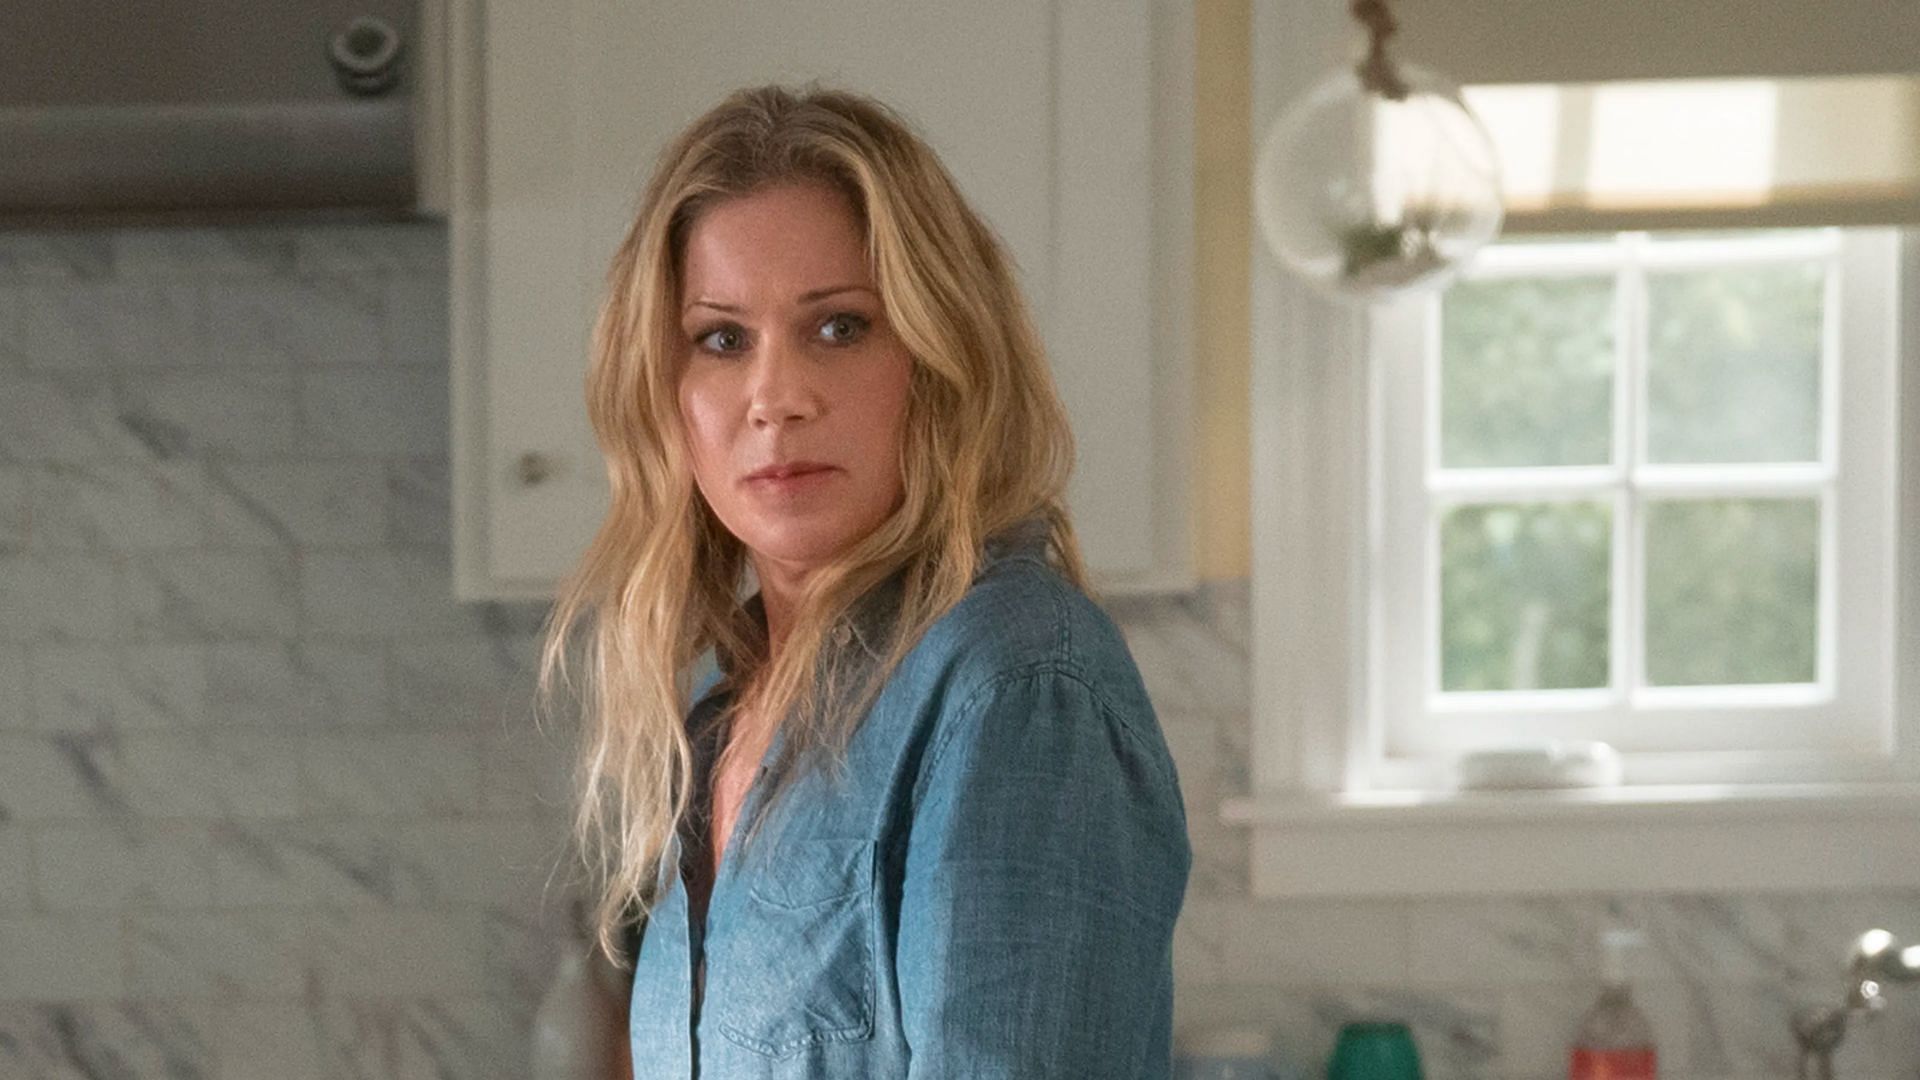 Christina Applegate in a still from Dead To Me (Image via Netflix)